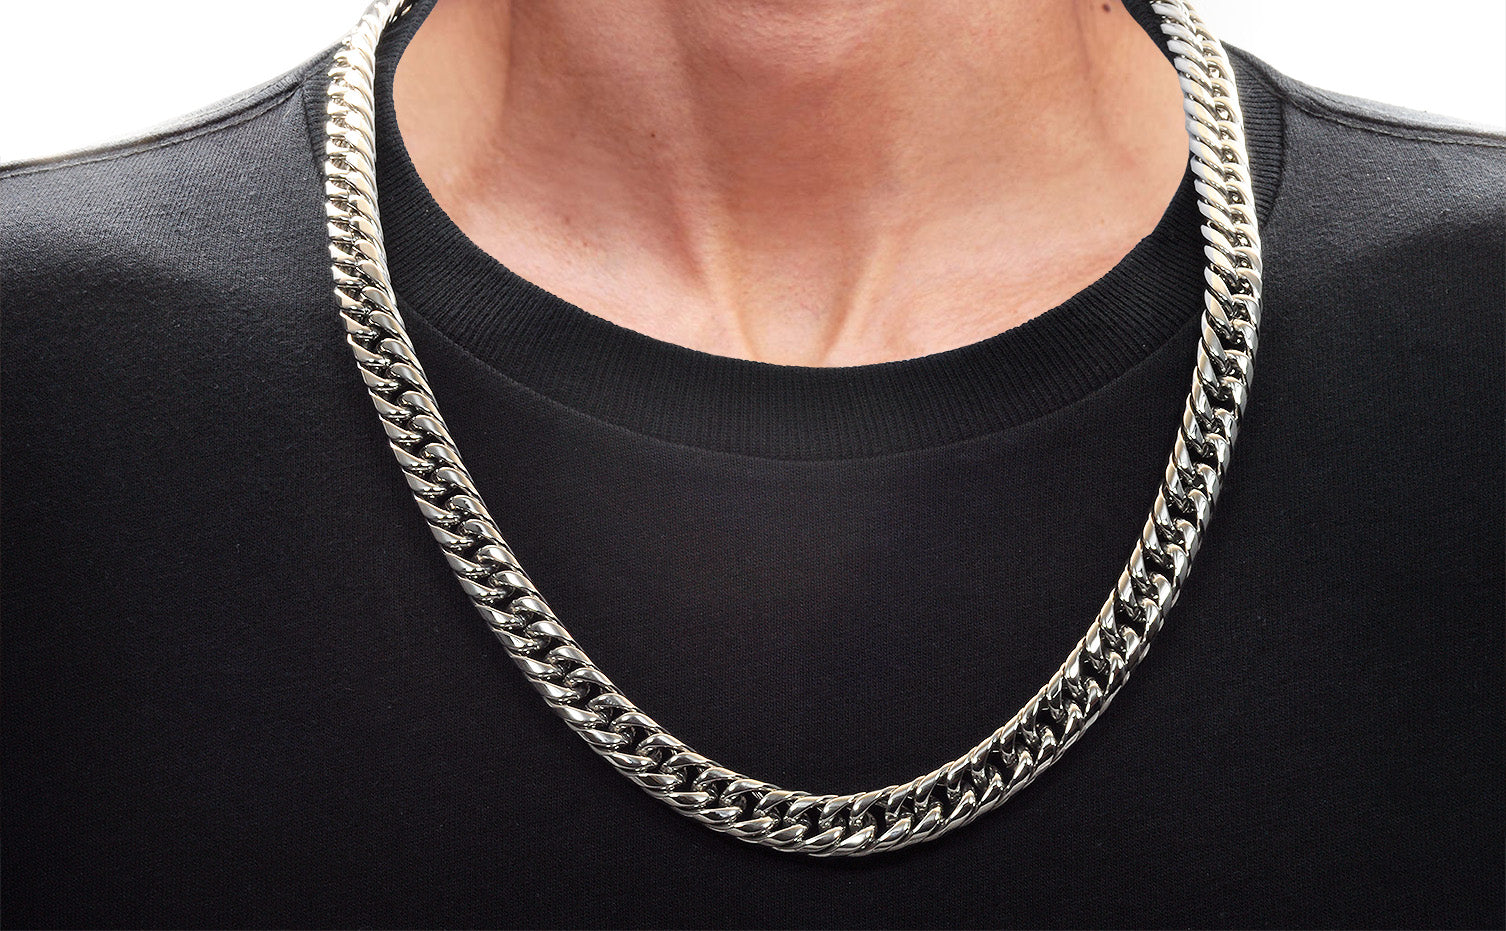 Link Chain Necklace Stainless Steel Double Dog Tag Polished Pendant Men  Jewelry | eBay